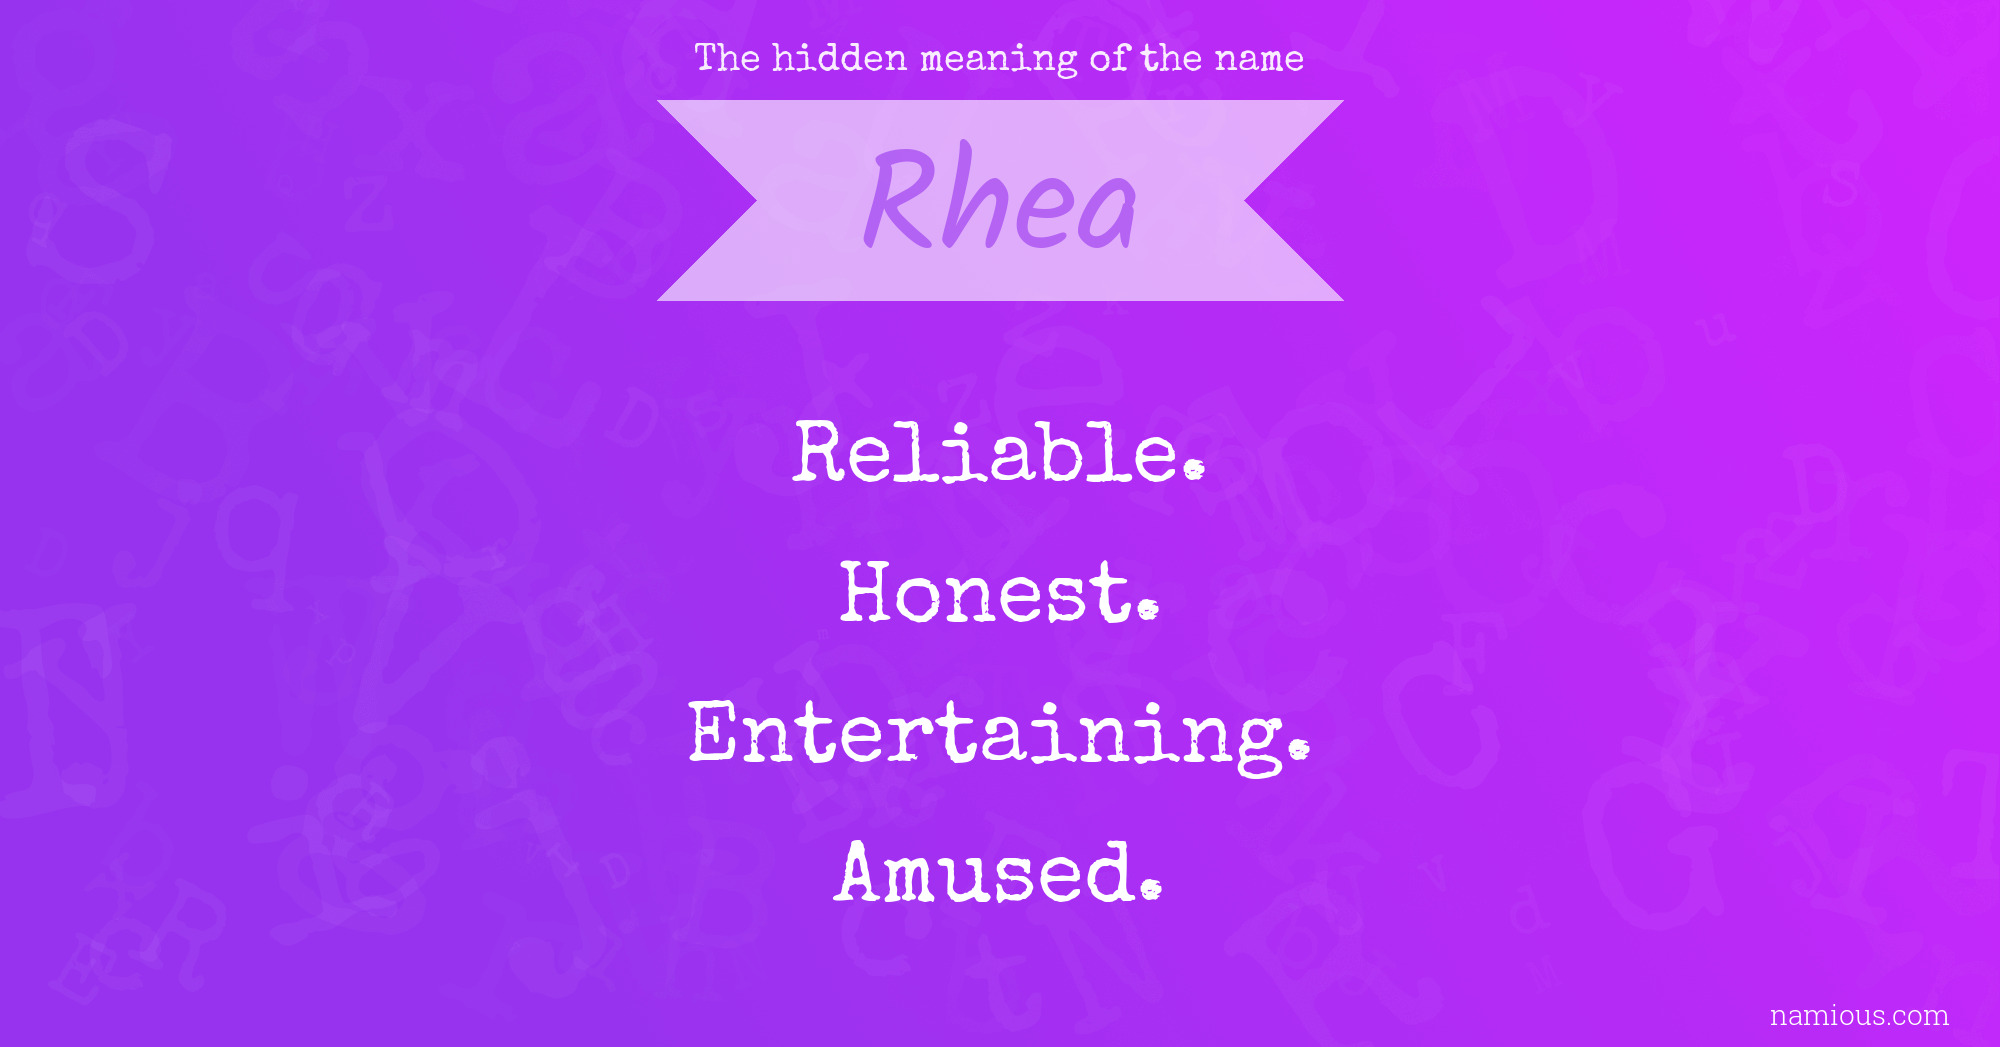 The hidden meaning of the name Rhea